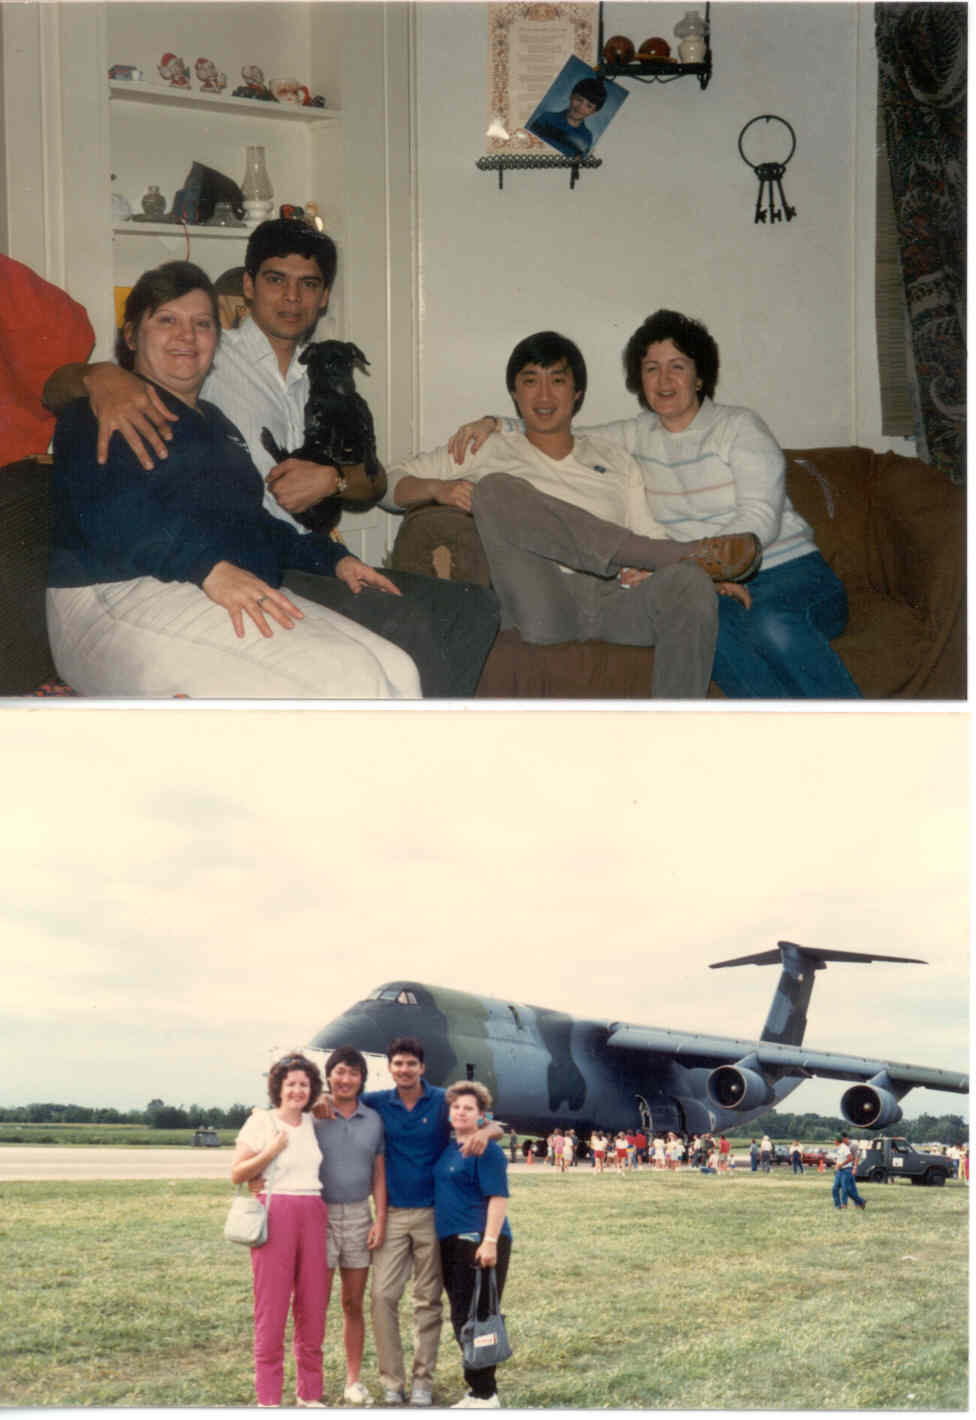  Myself and my friend Lek (from Thailand) with Carolyn and Mary our respective wives (1987)  